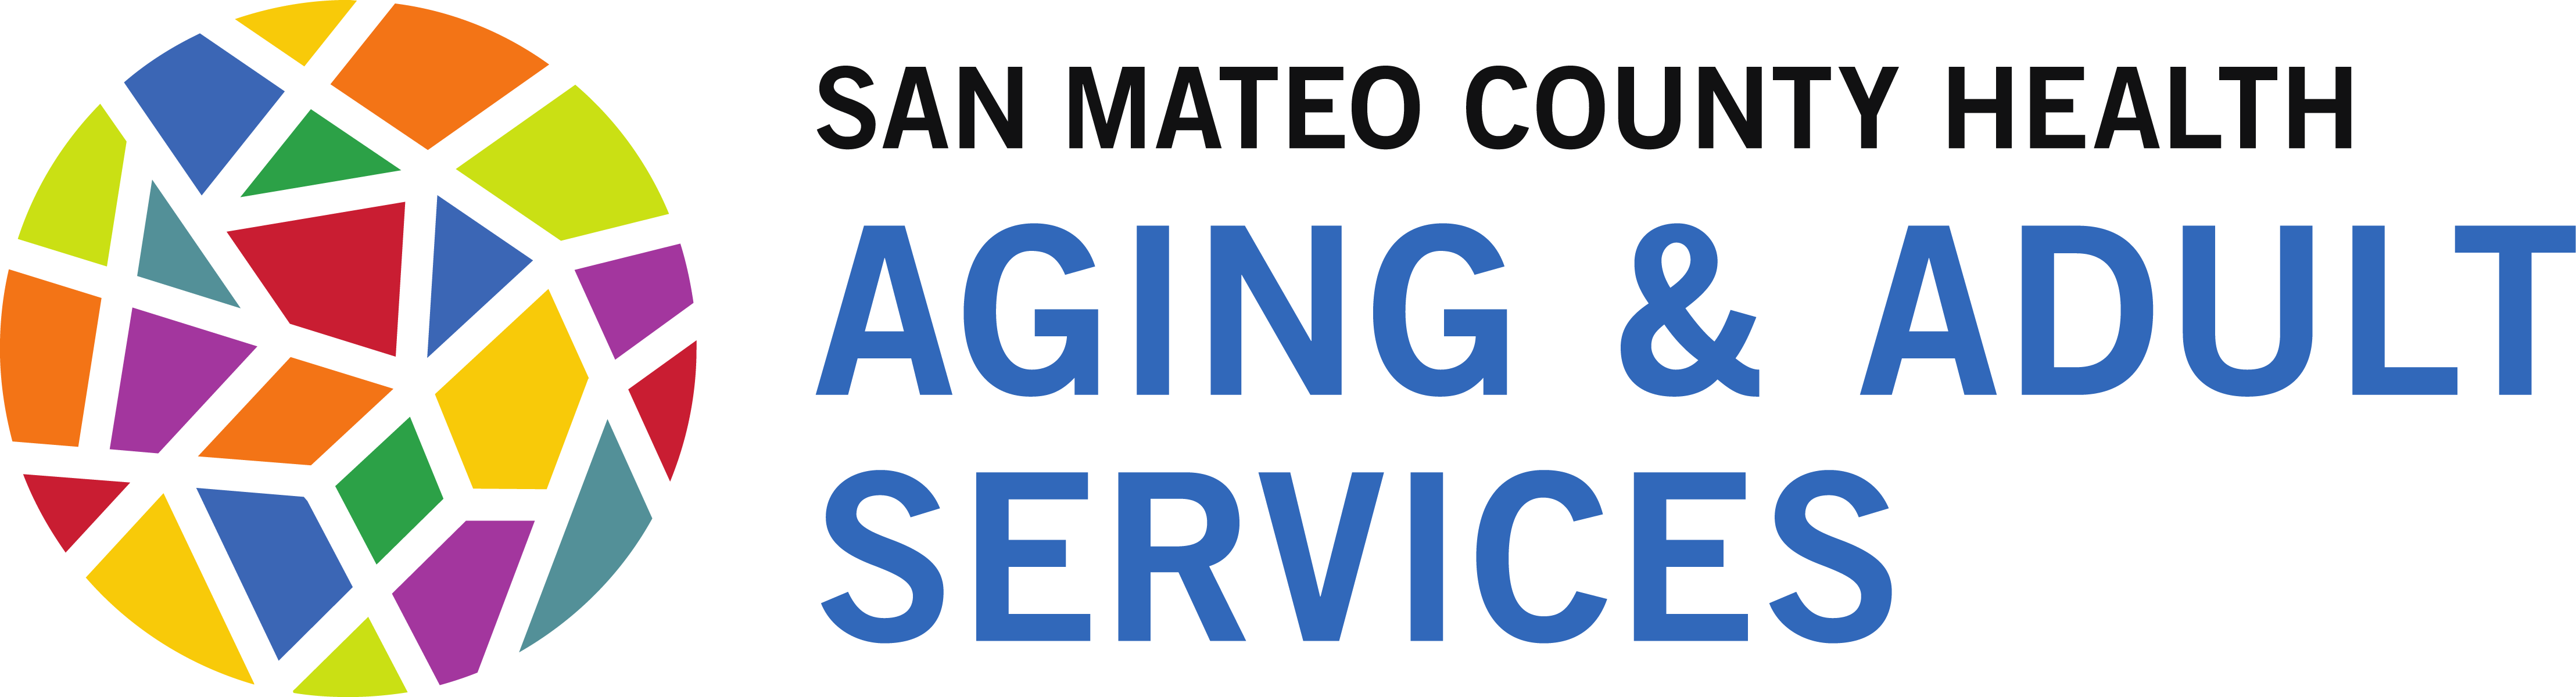 Logo of San Mateo County Health Aging & Adult Services.